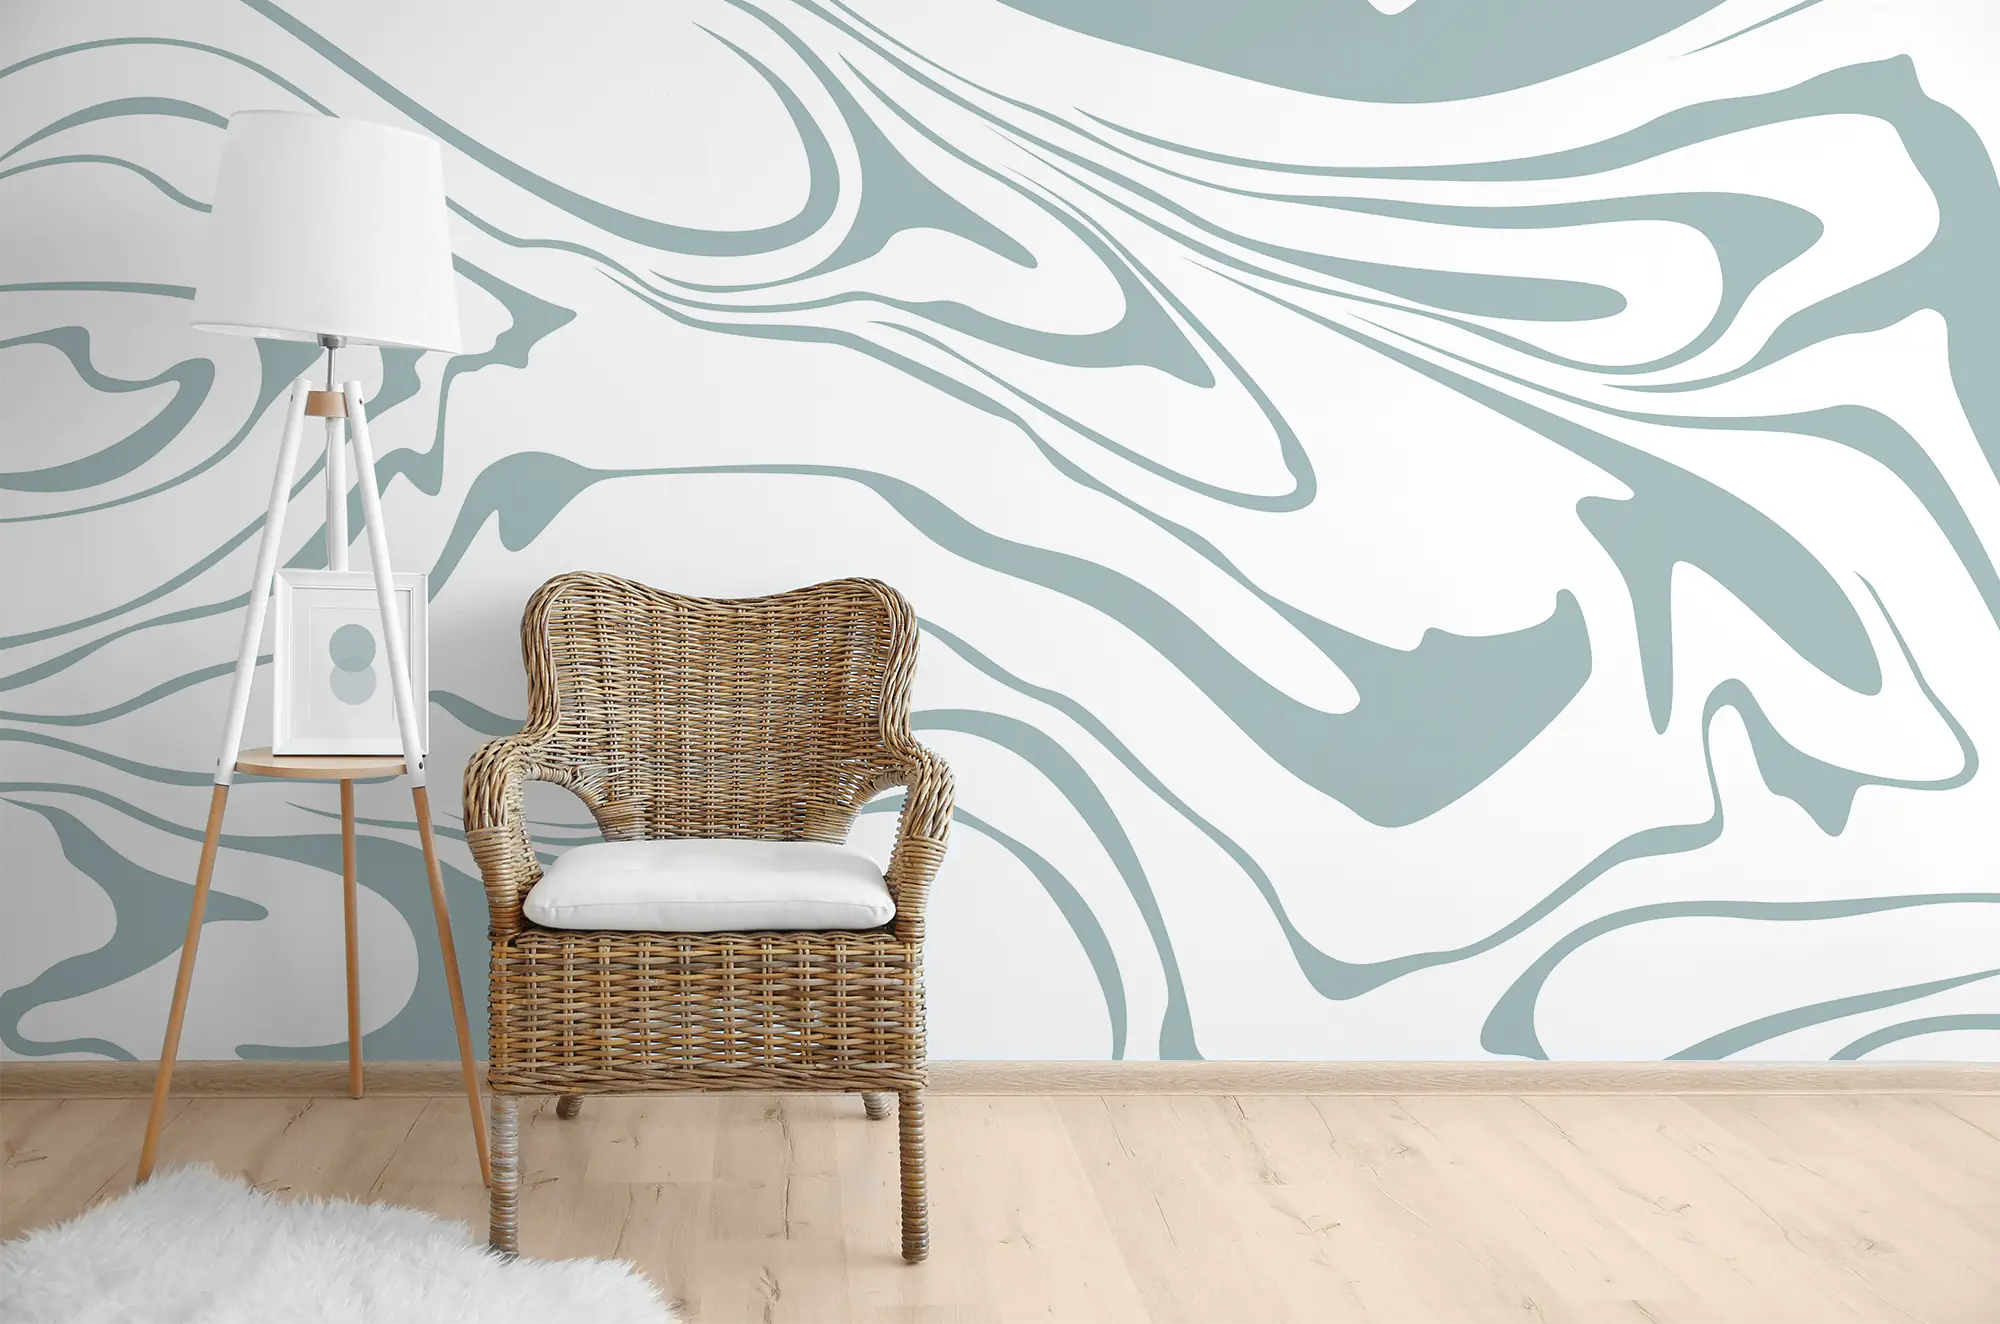 Room-chair-wallpaper-mural-wall-marbling-abstract-design